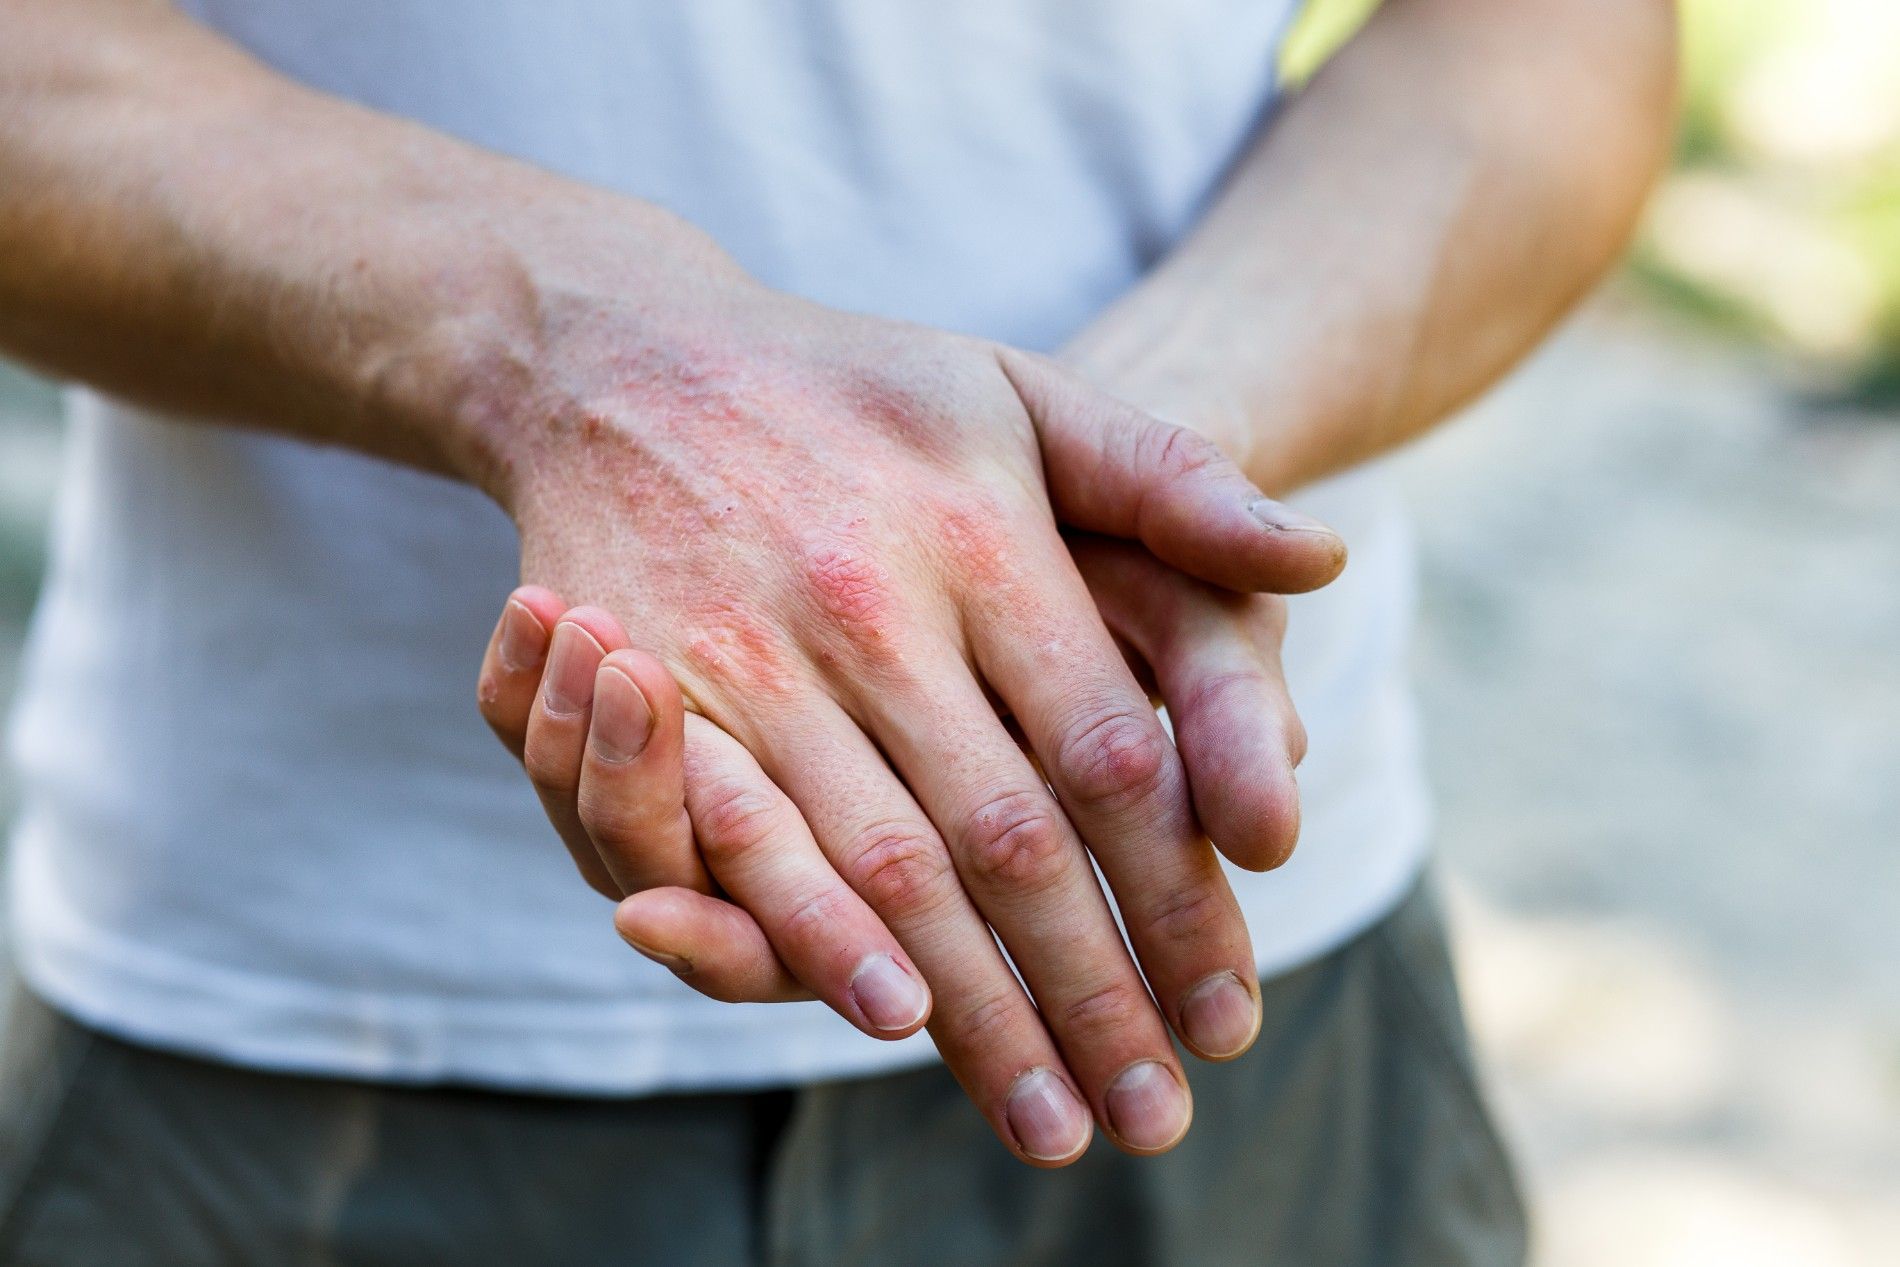 a man with a rash on his hands is holding his hands together